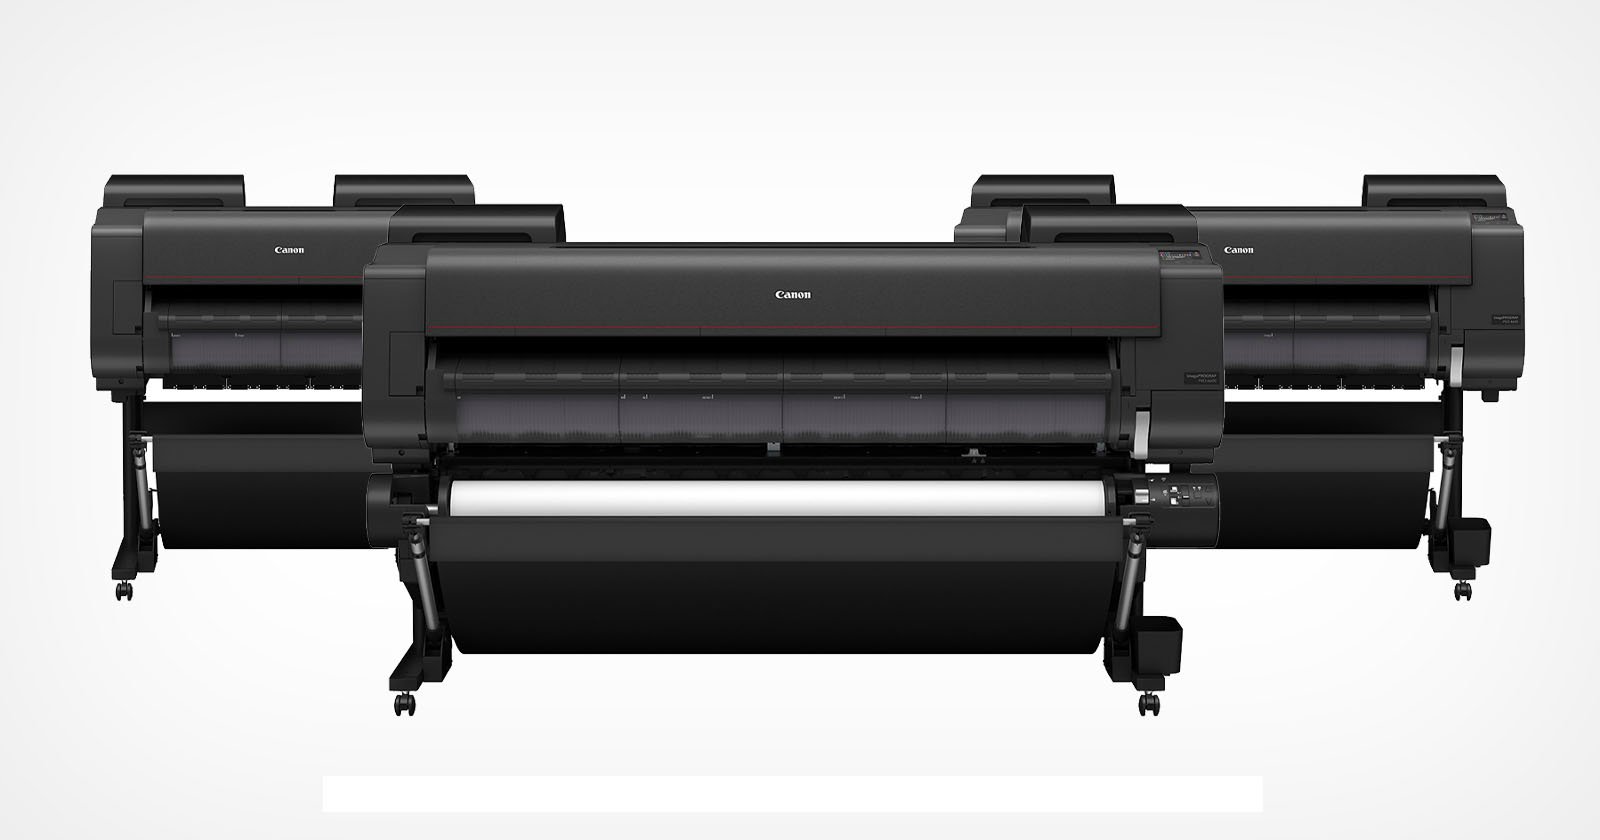  canon adds three 11-color printers its large-format series 